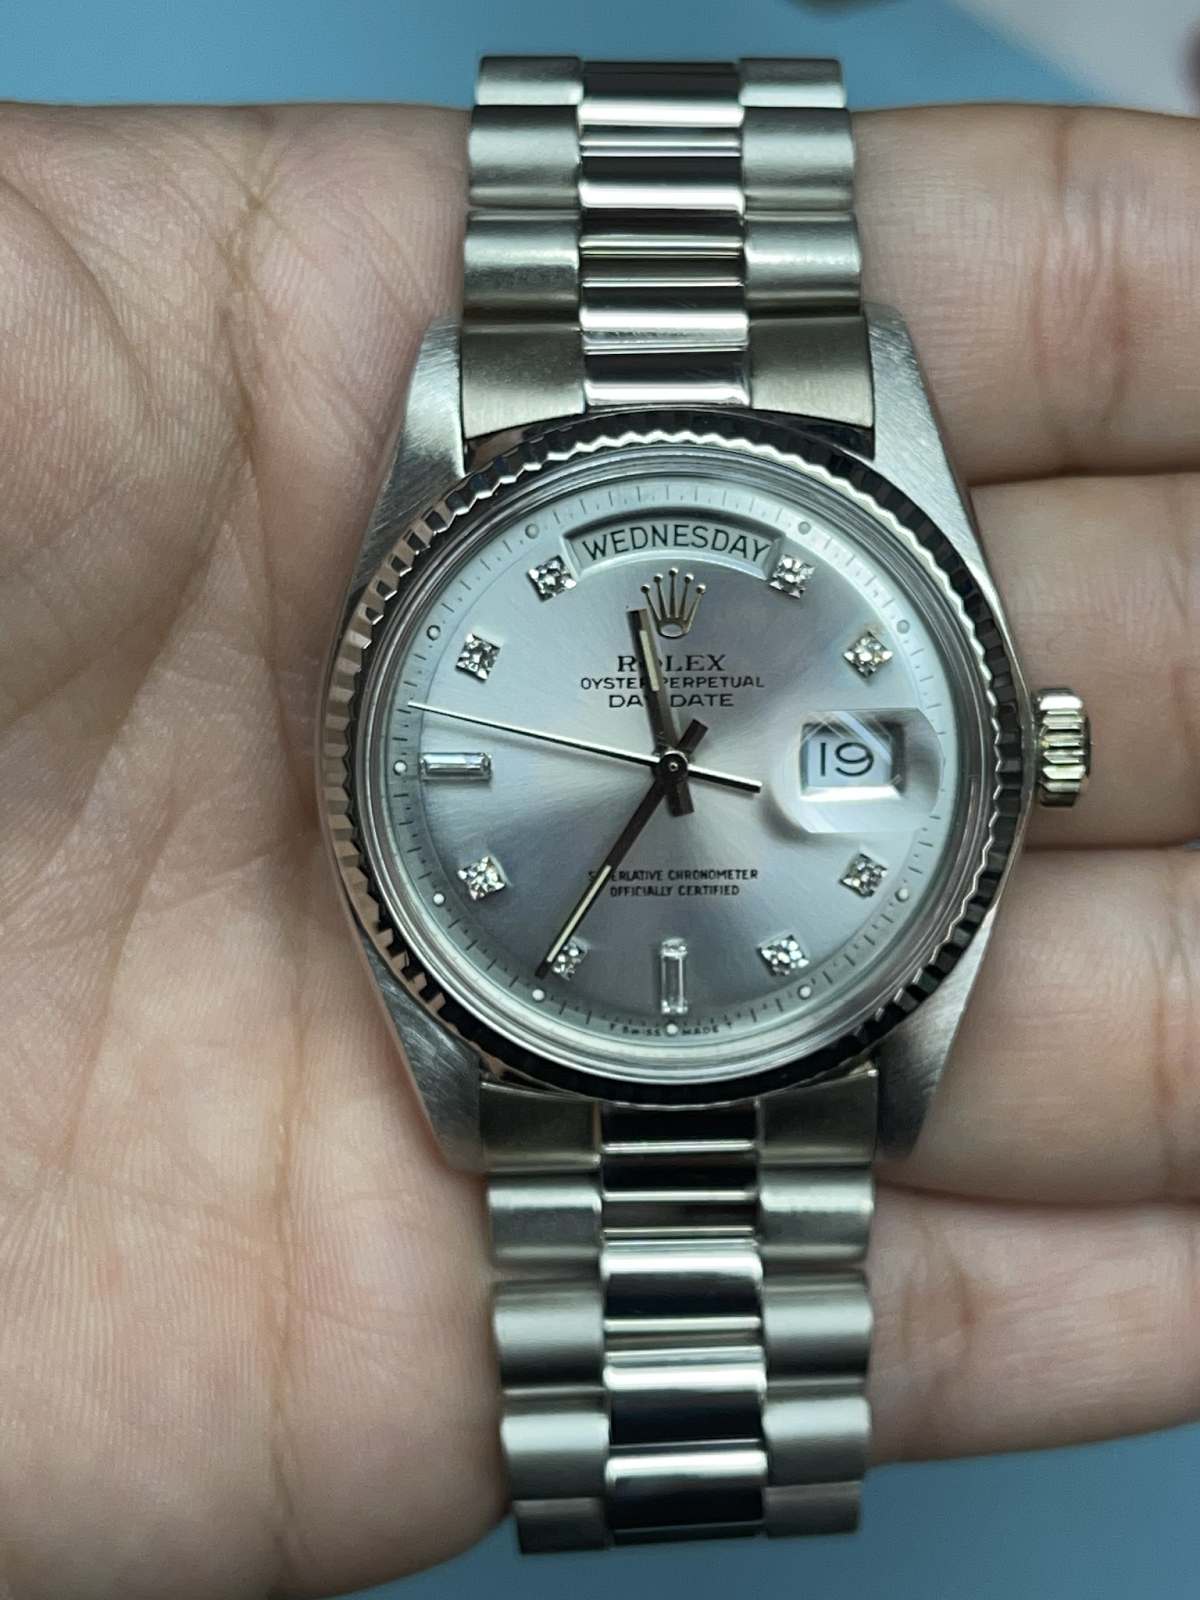 Gray & Sons - Top Repair Center For Rolex Watches